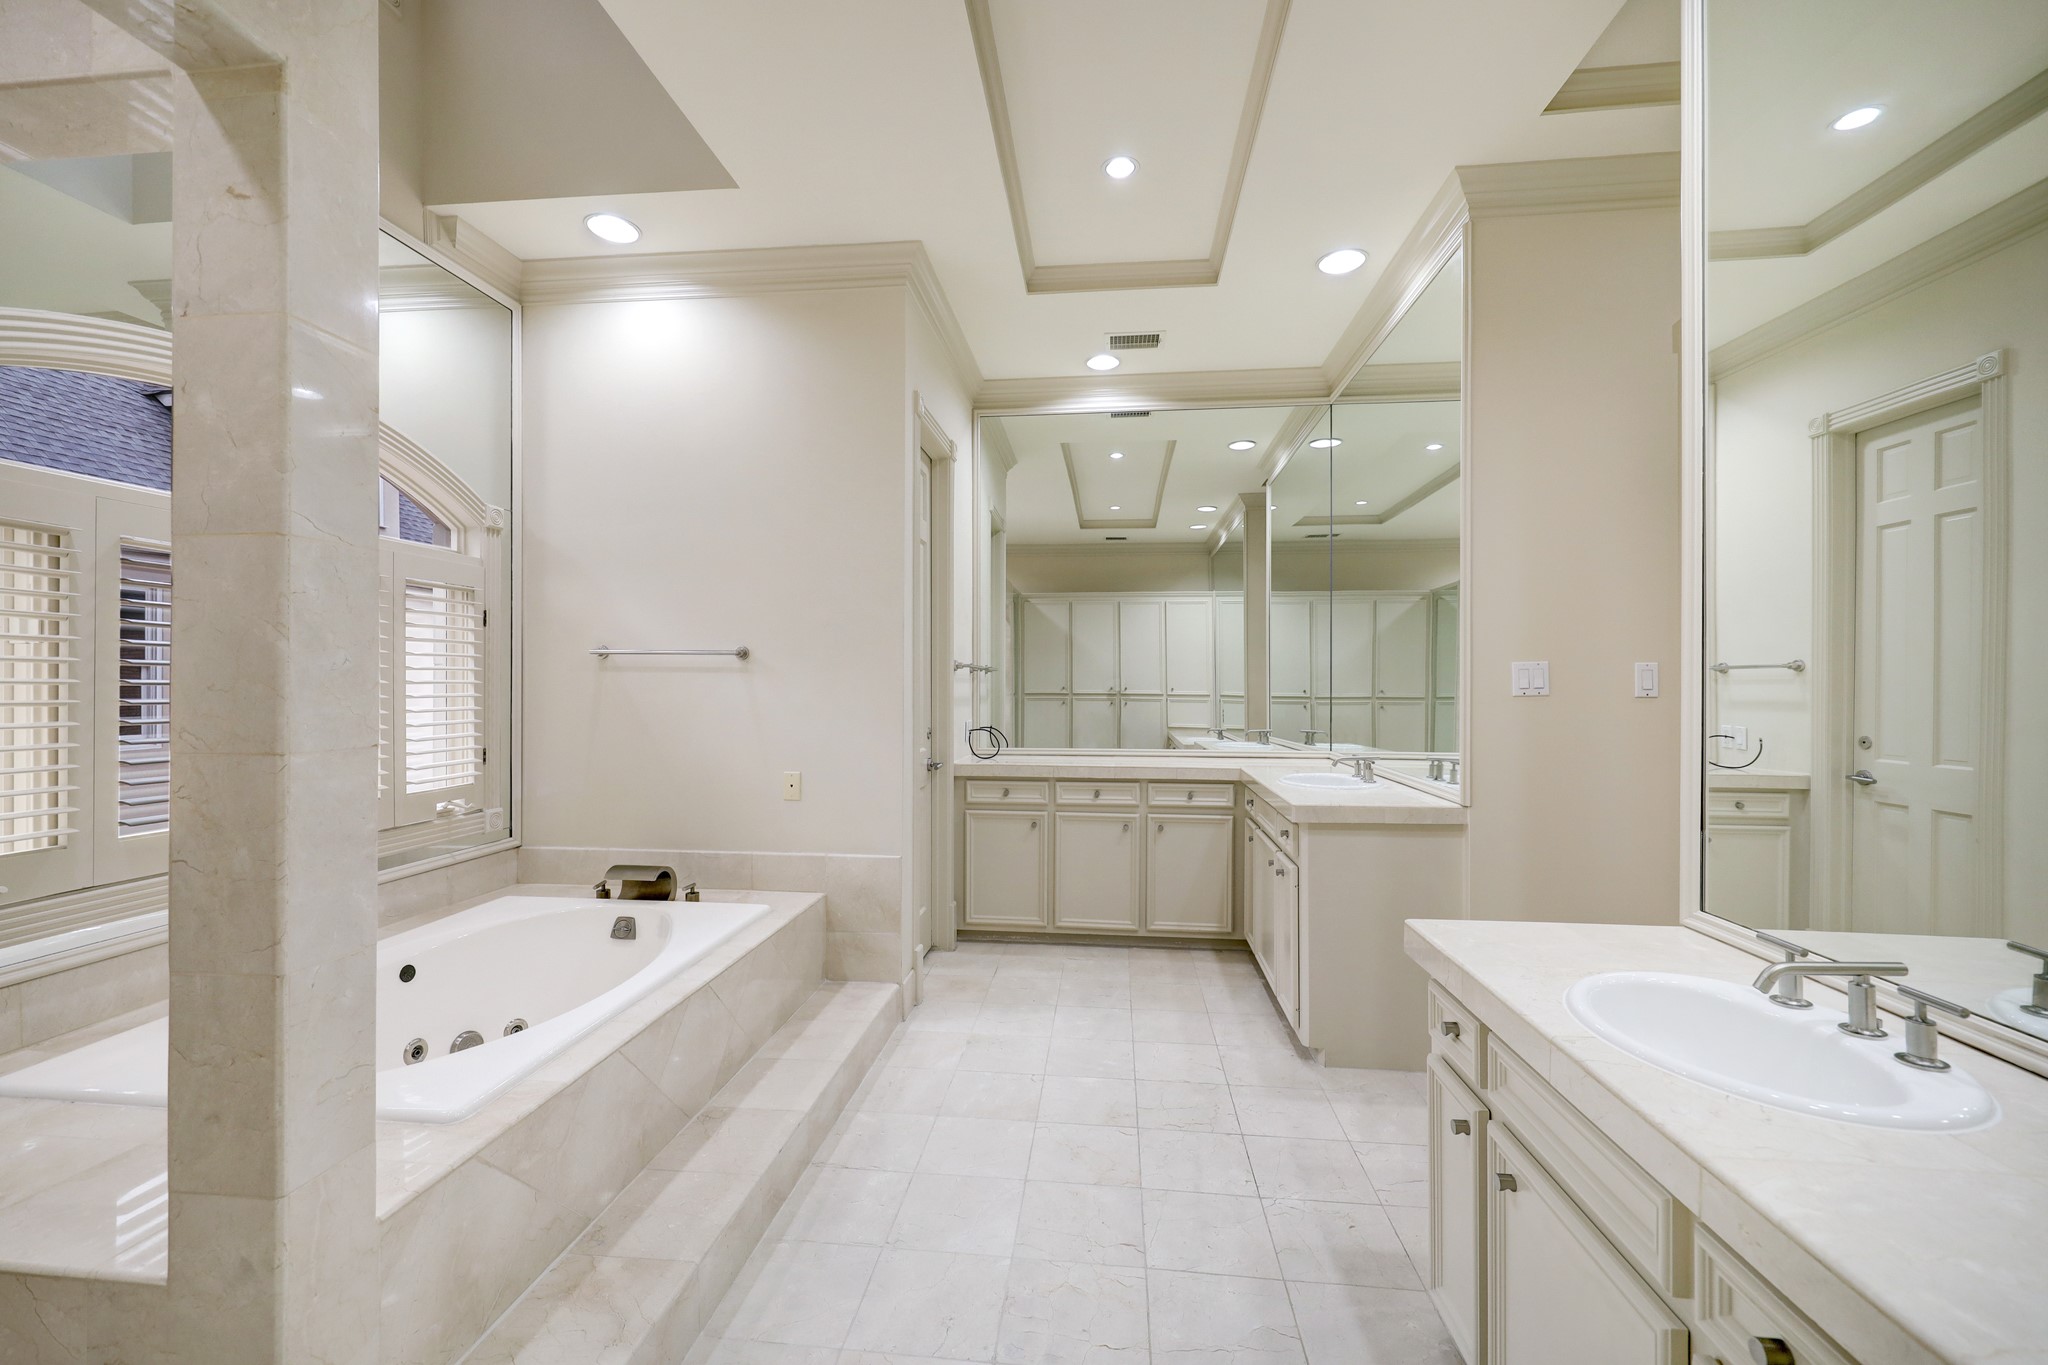 The double vanities with sinks allow for two people to use this primary bath with ease and comfort.